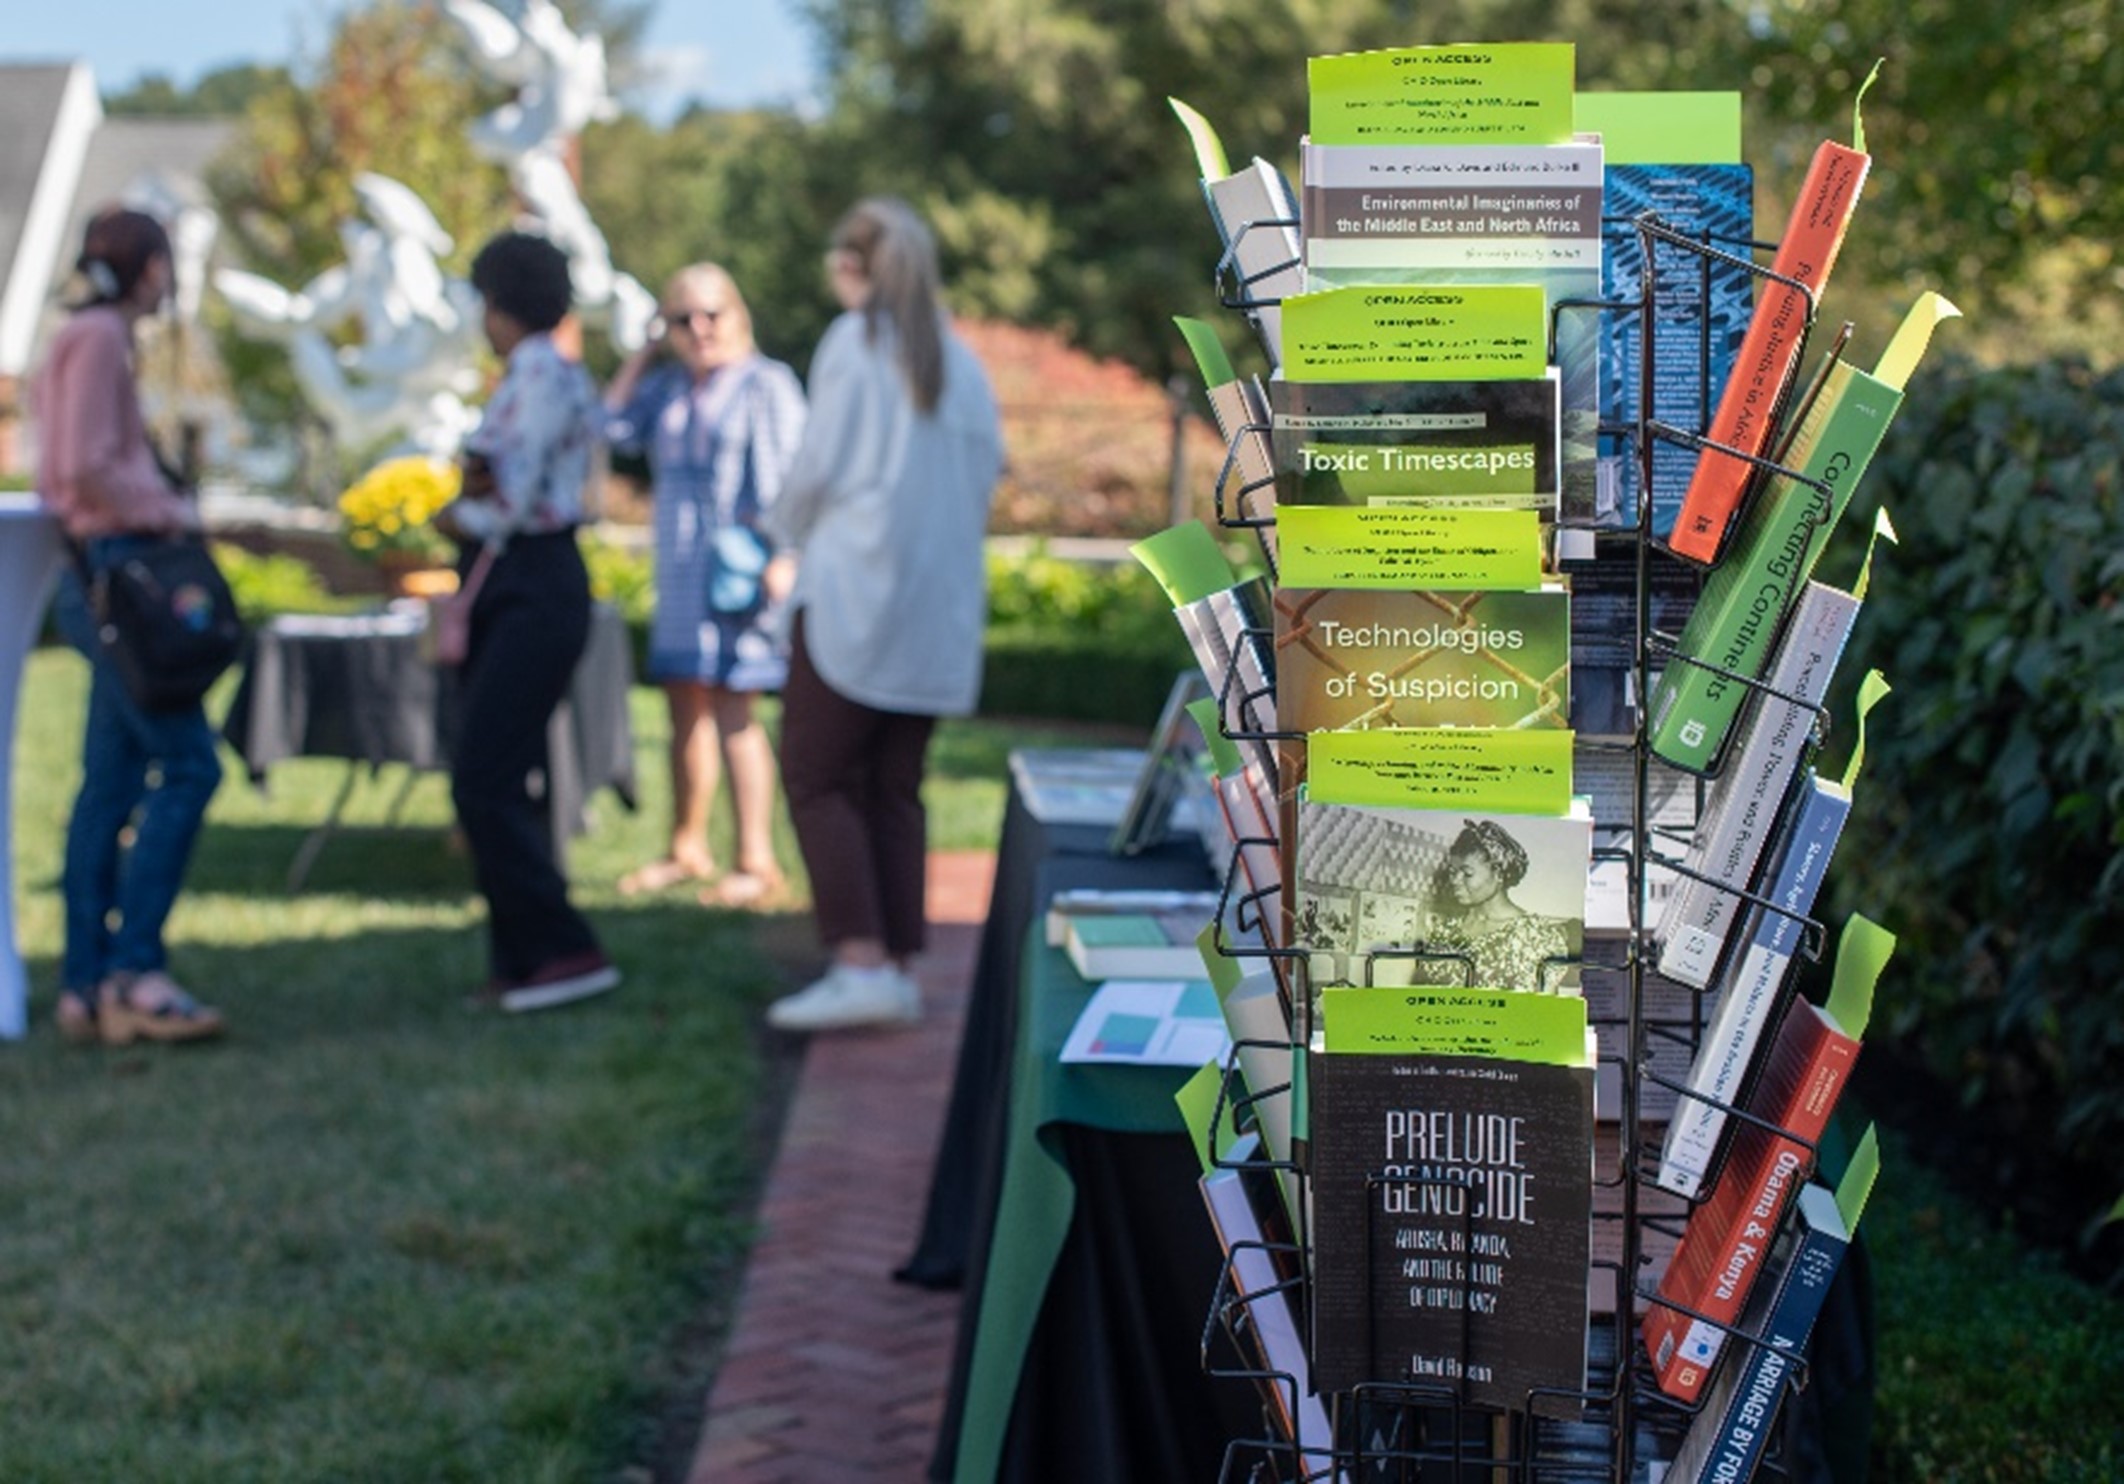 Photo of books from the Ohio University Press on display at the Gardens, Books and High Tea event